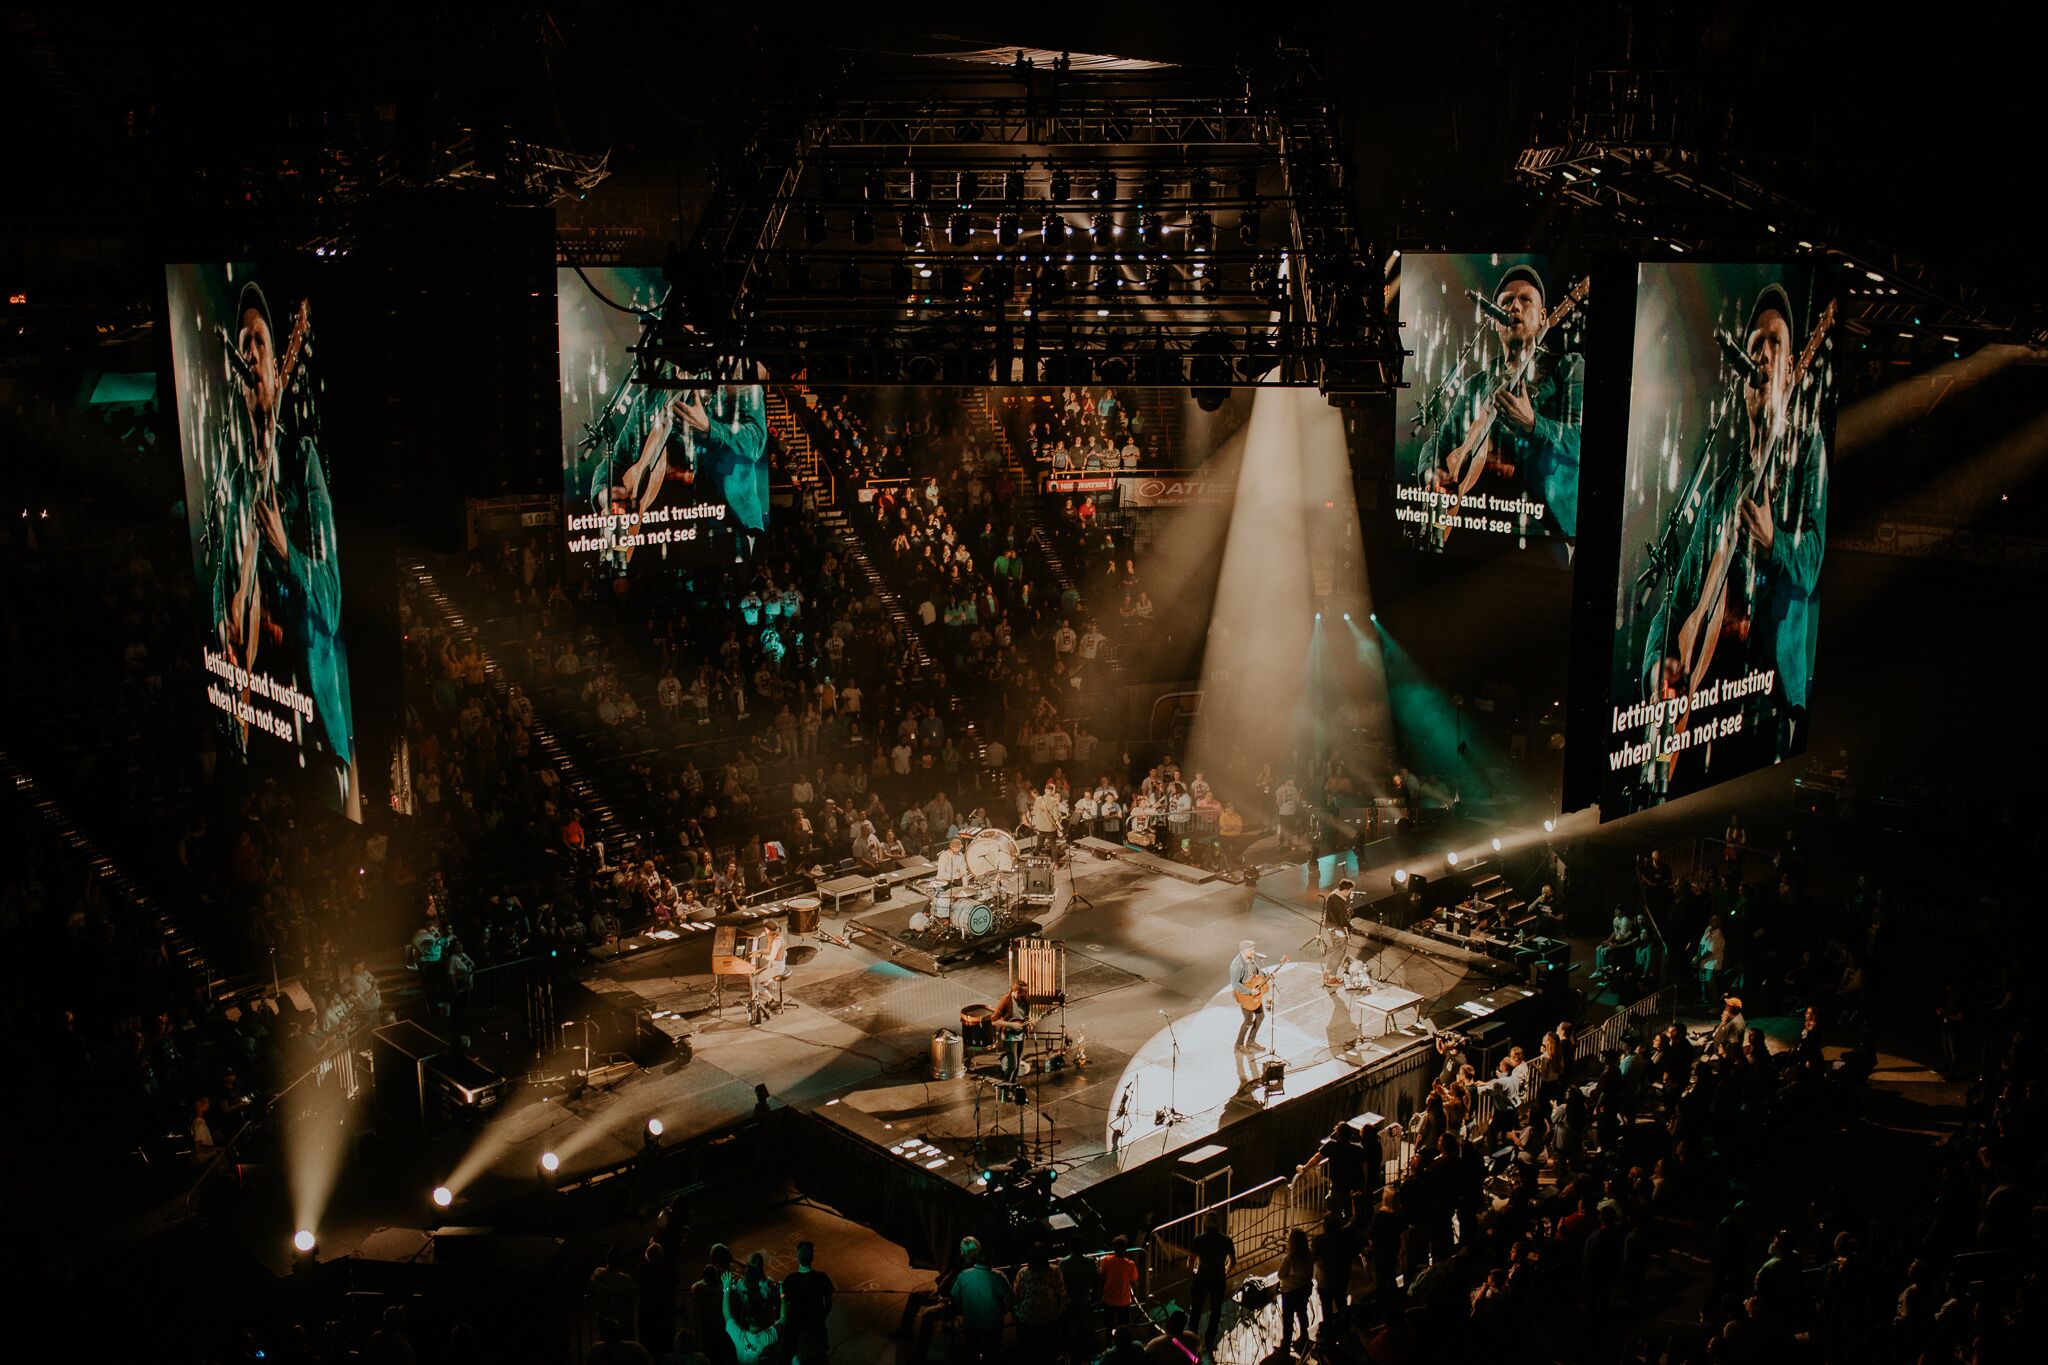 Winter Jam Music Tour Visual Experience Powered by Renewed Vision Live